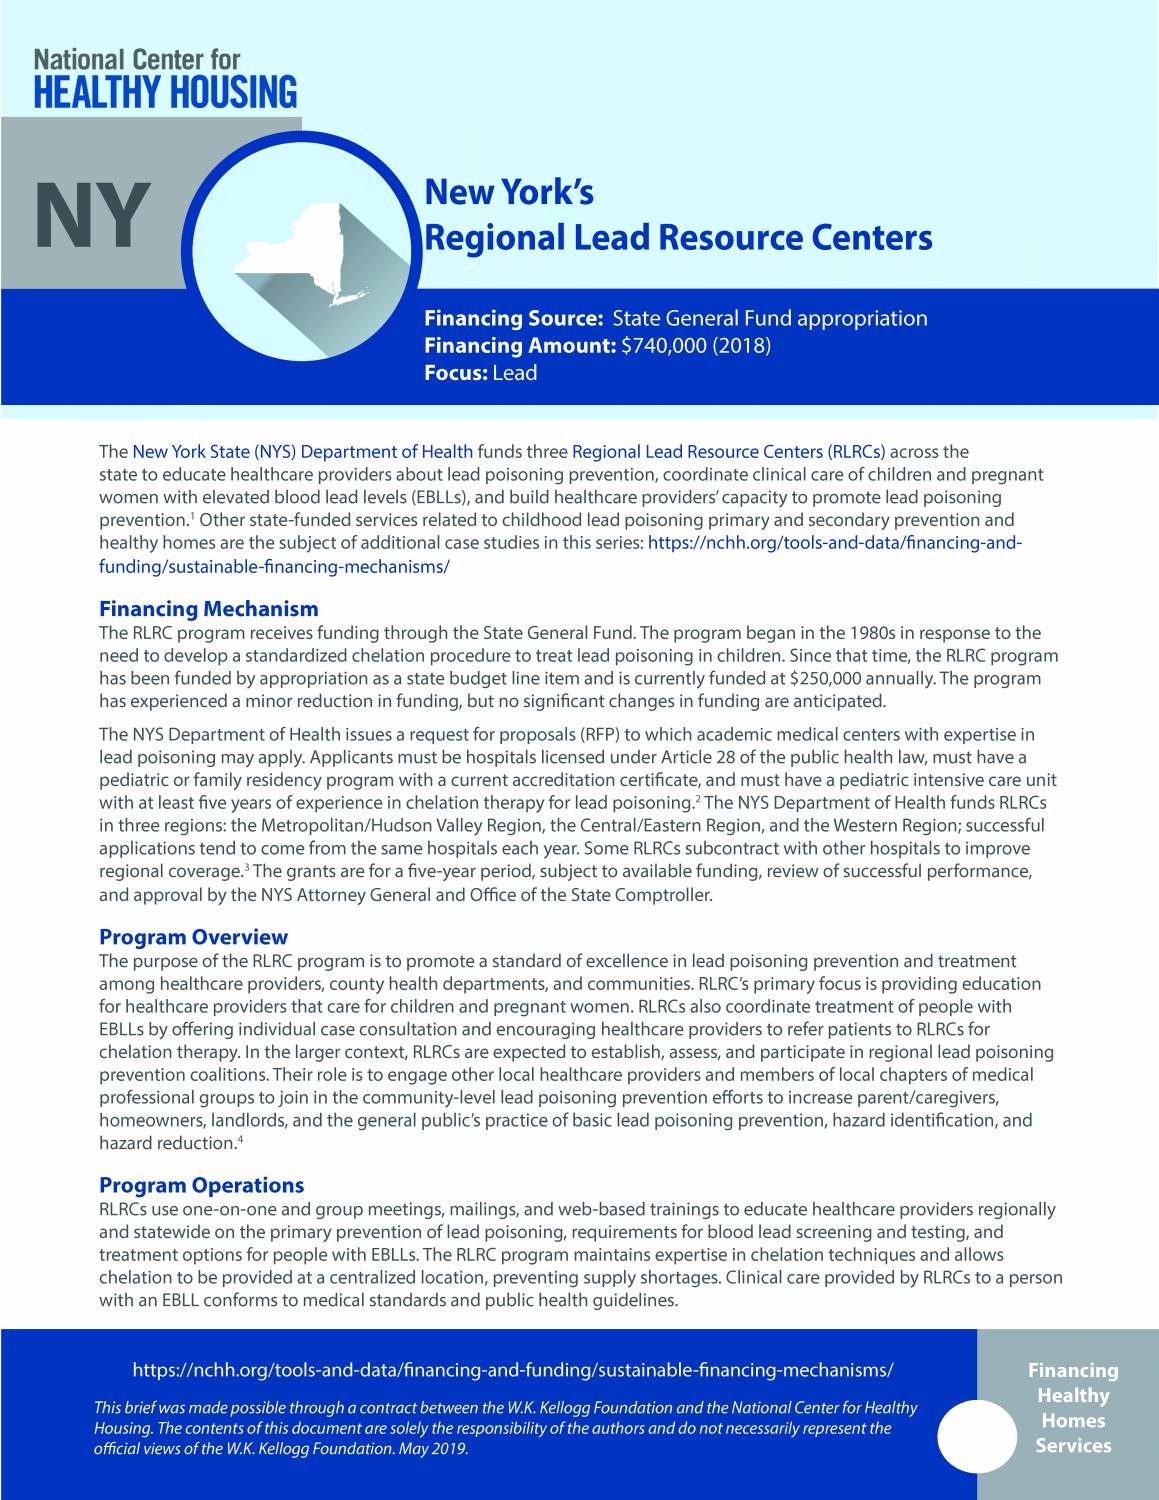 Sustainable Financing Mechanisms – New York's Regional Lead Resource Centers